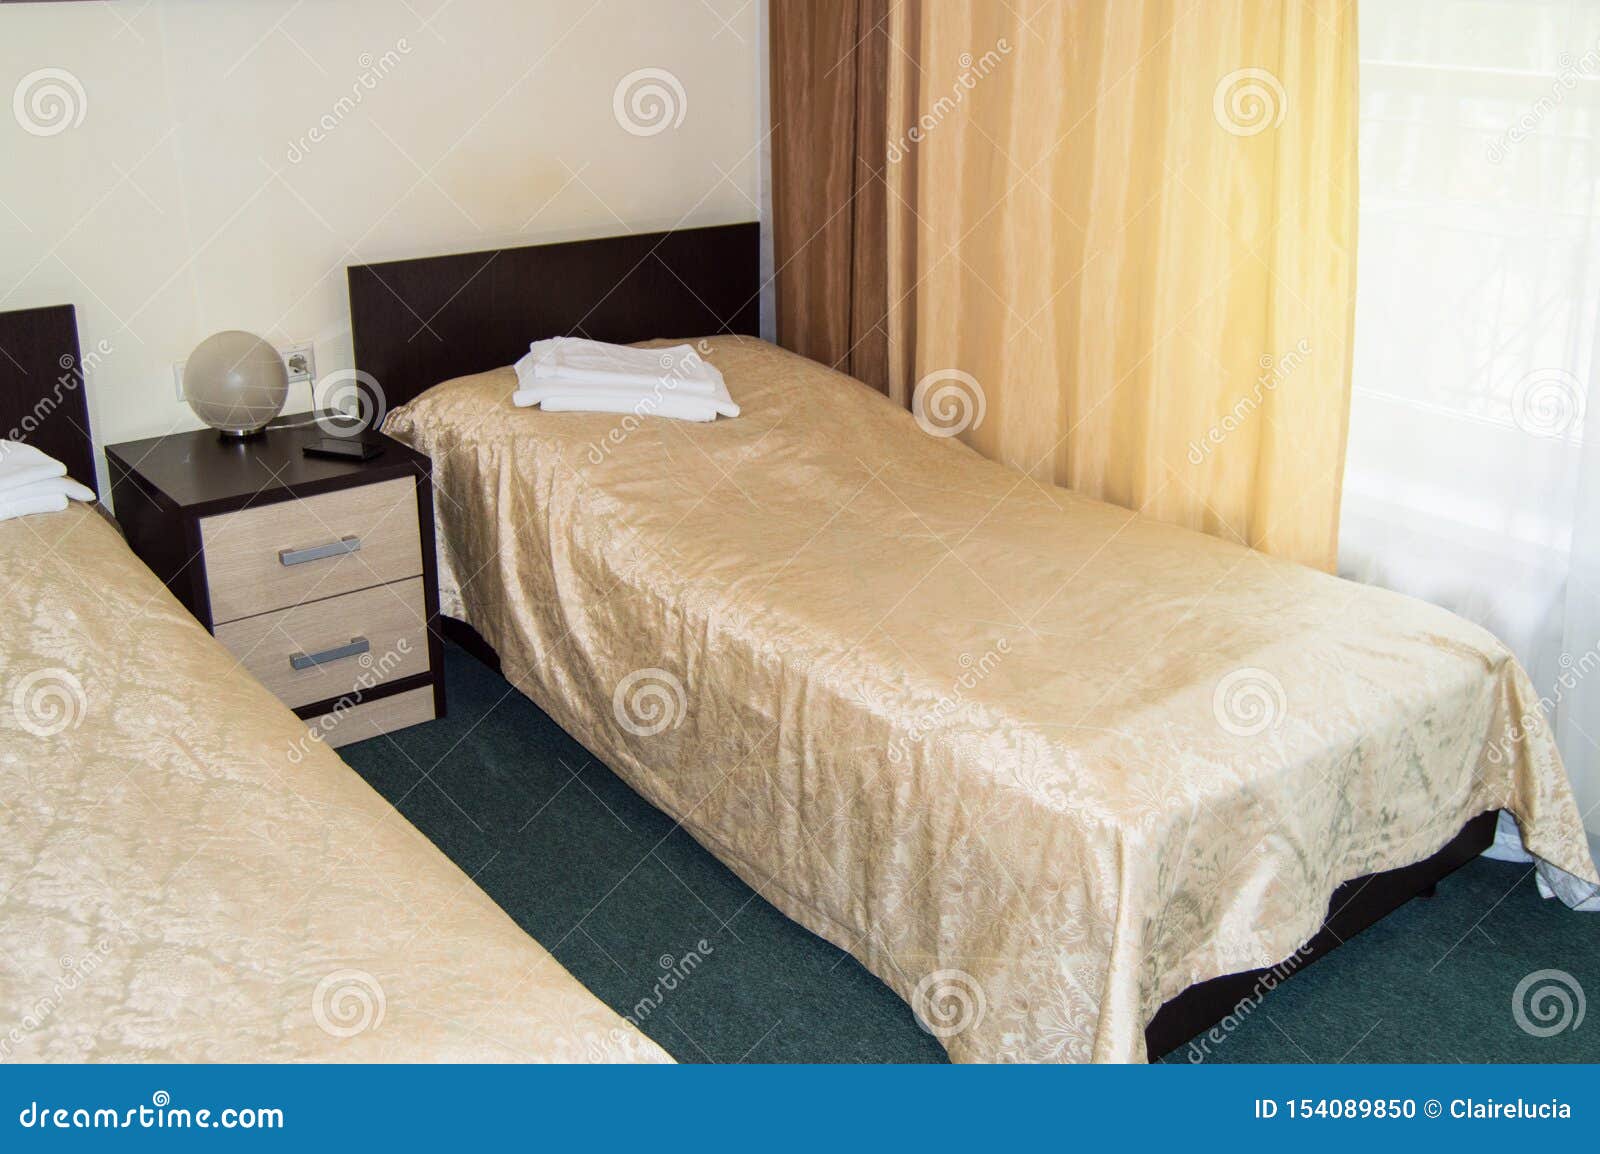 Modern Double Room With Two Single Beds Bedside Table Towels And